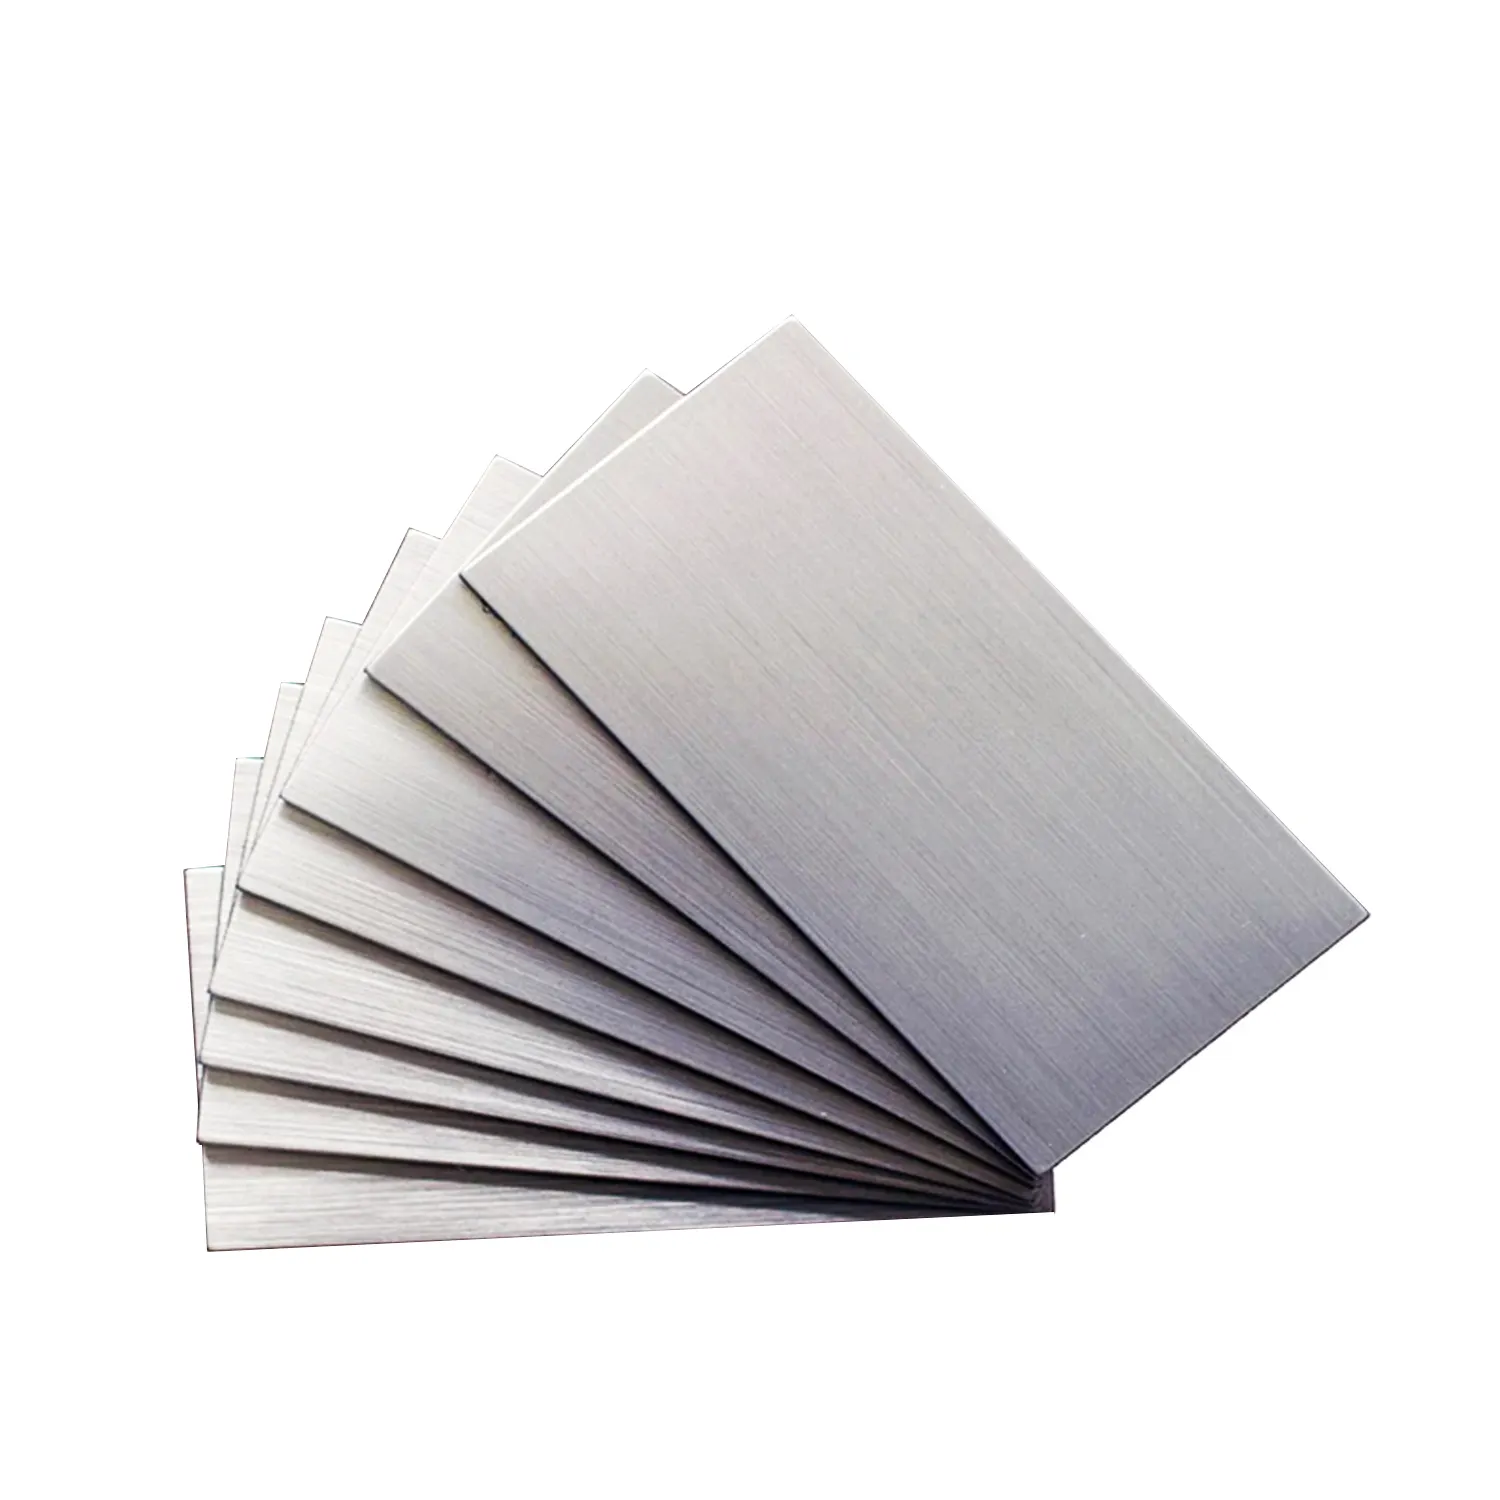 Customized 201 Stainless Steel Plate Square Meter Price Set Plate Sheet Premium Quality Stainless Steel Plate